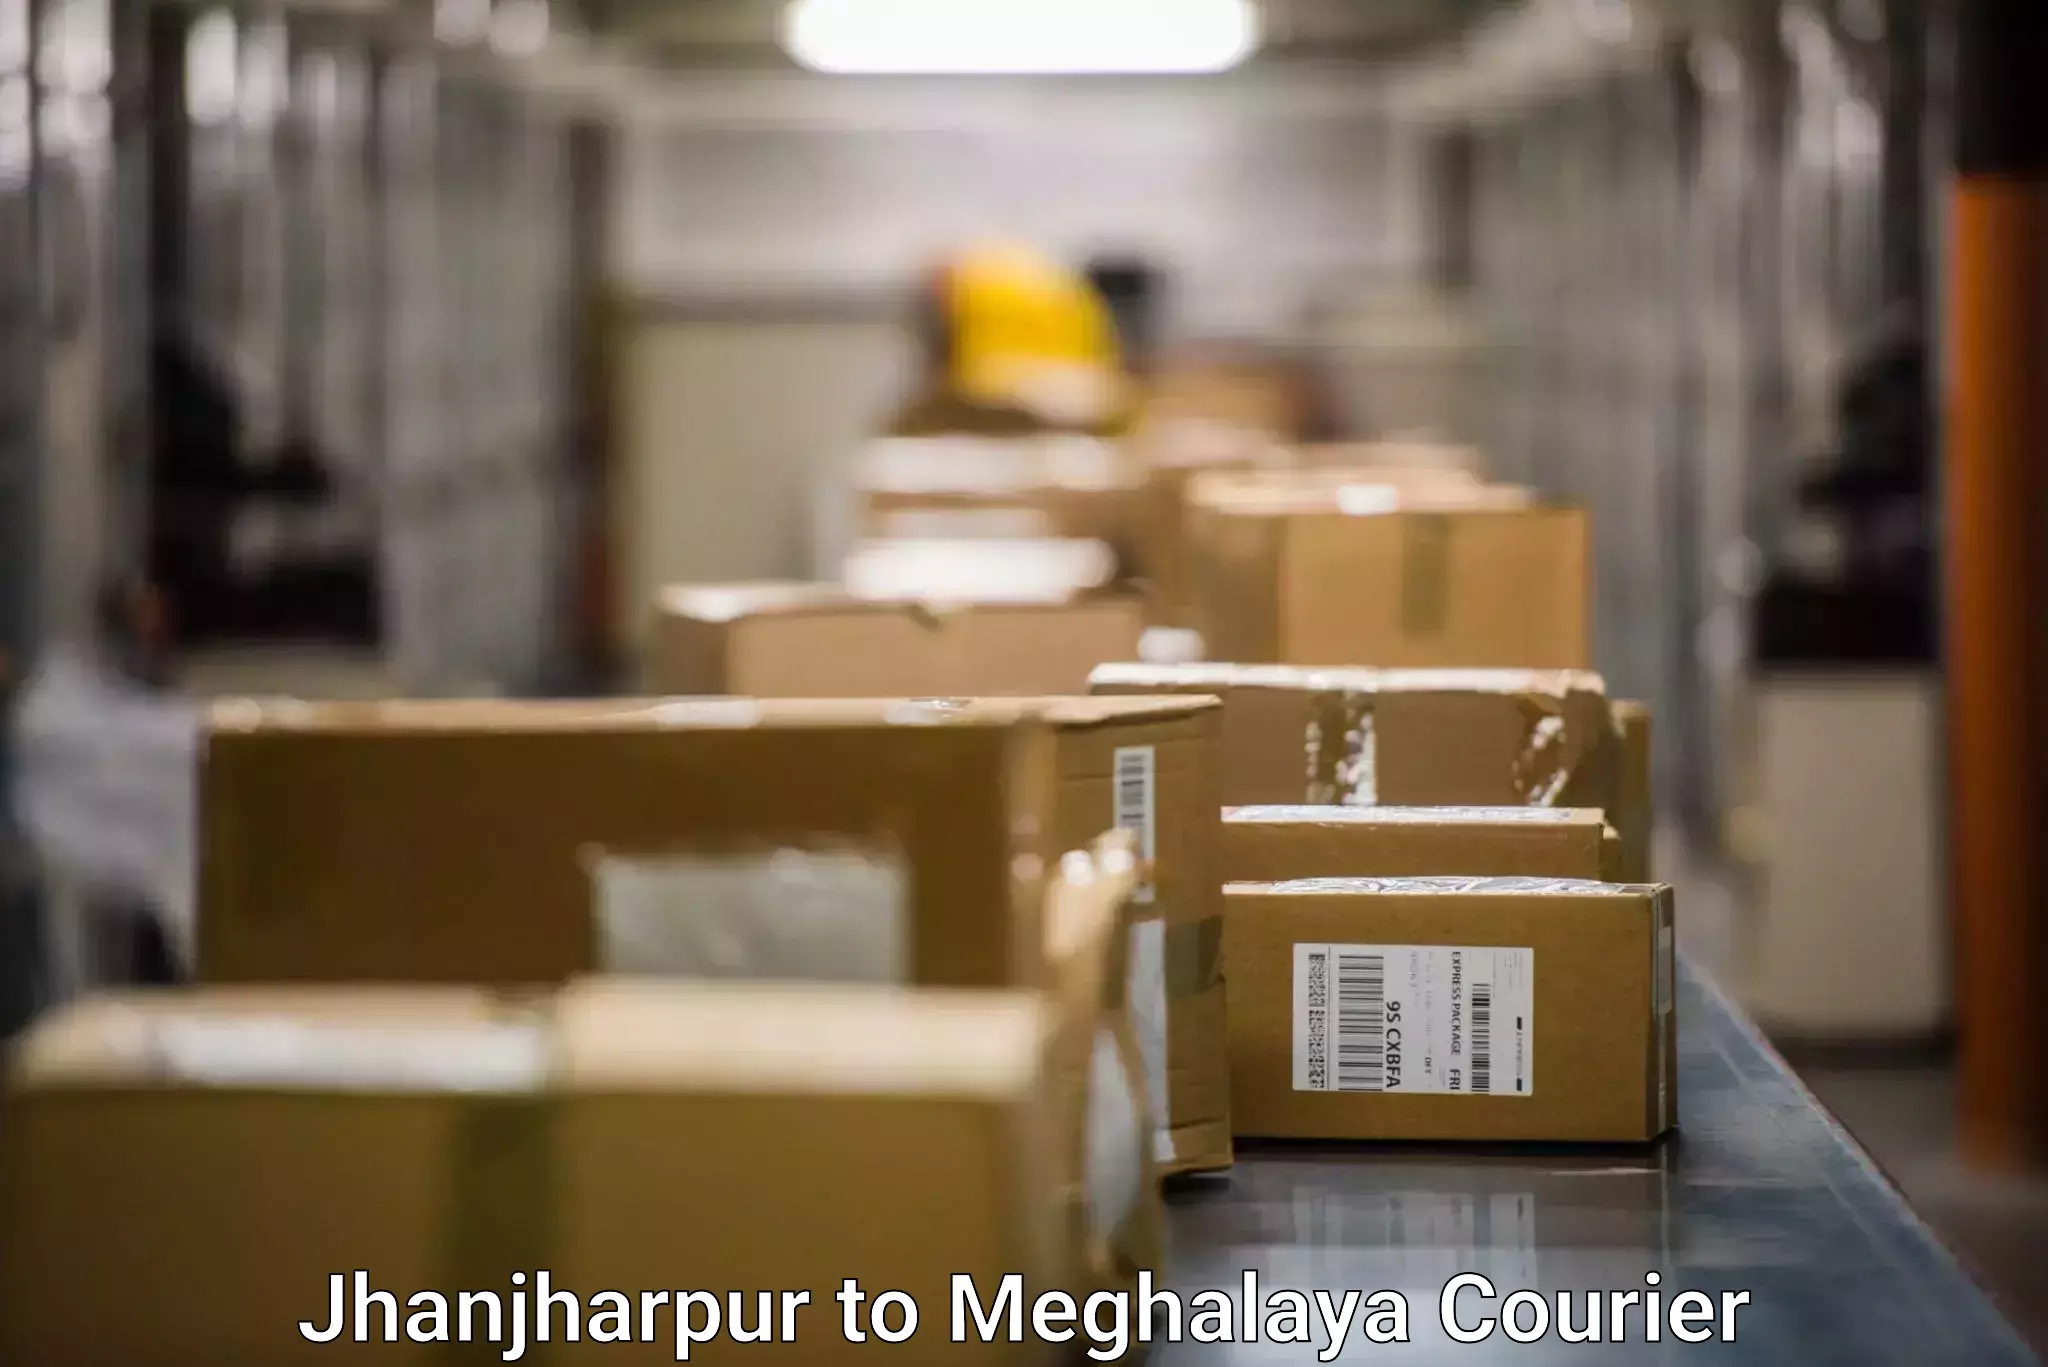 Courier service partnerships Jhanjharpur to Umsaw